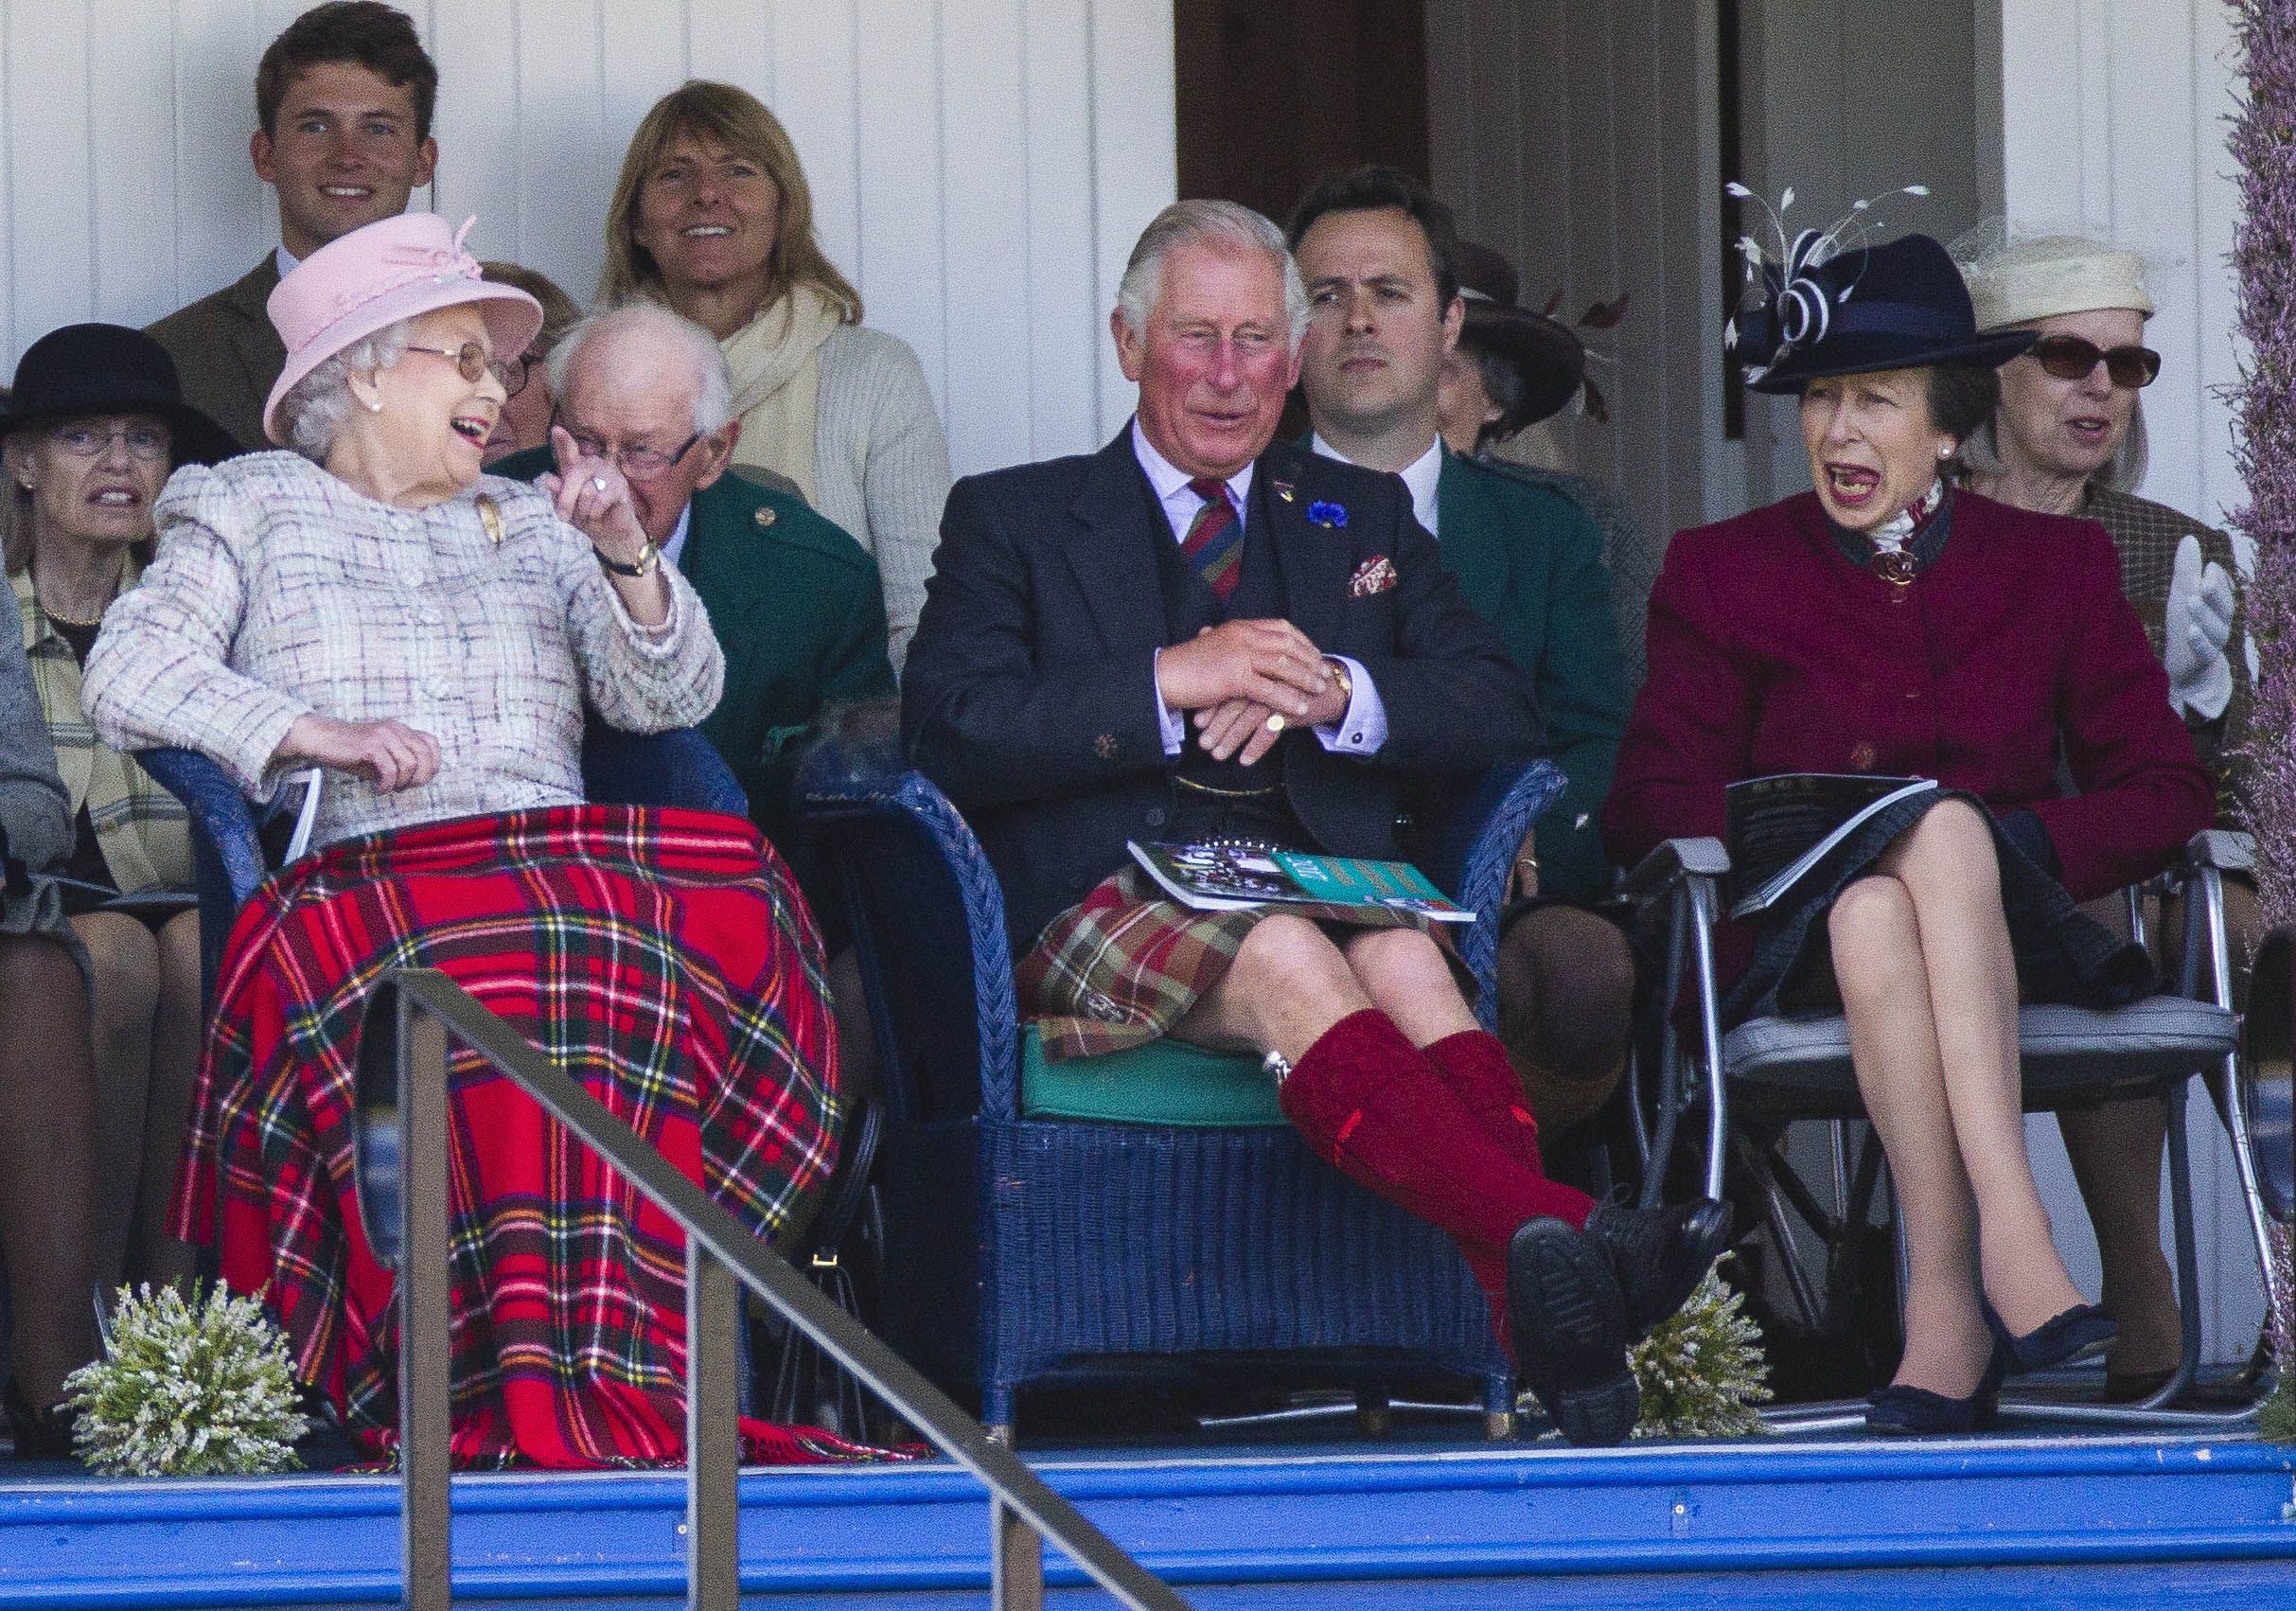 <p>Fifty-five years later, Queen Elizabeth II attended the same event with Princess Anne and Prince Charles. They really seemed to enjoy the sack race at the Braemar Highland Gathering in Scotland on Sept. 2, 2017.</p>